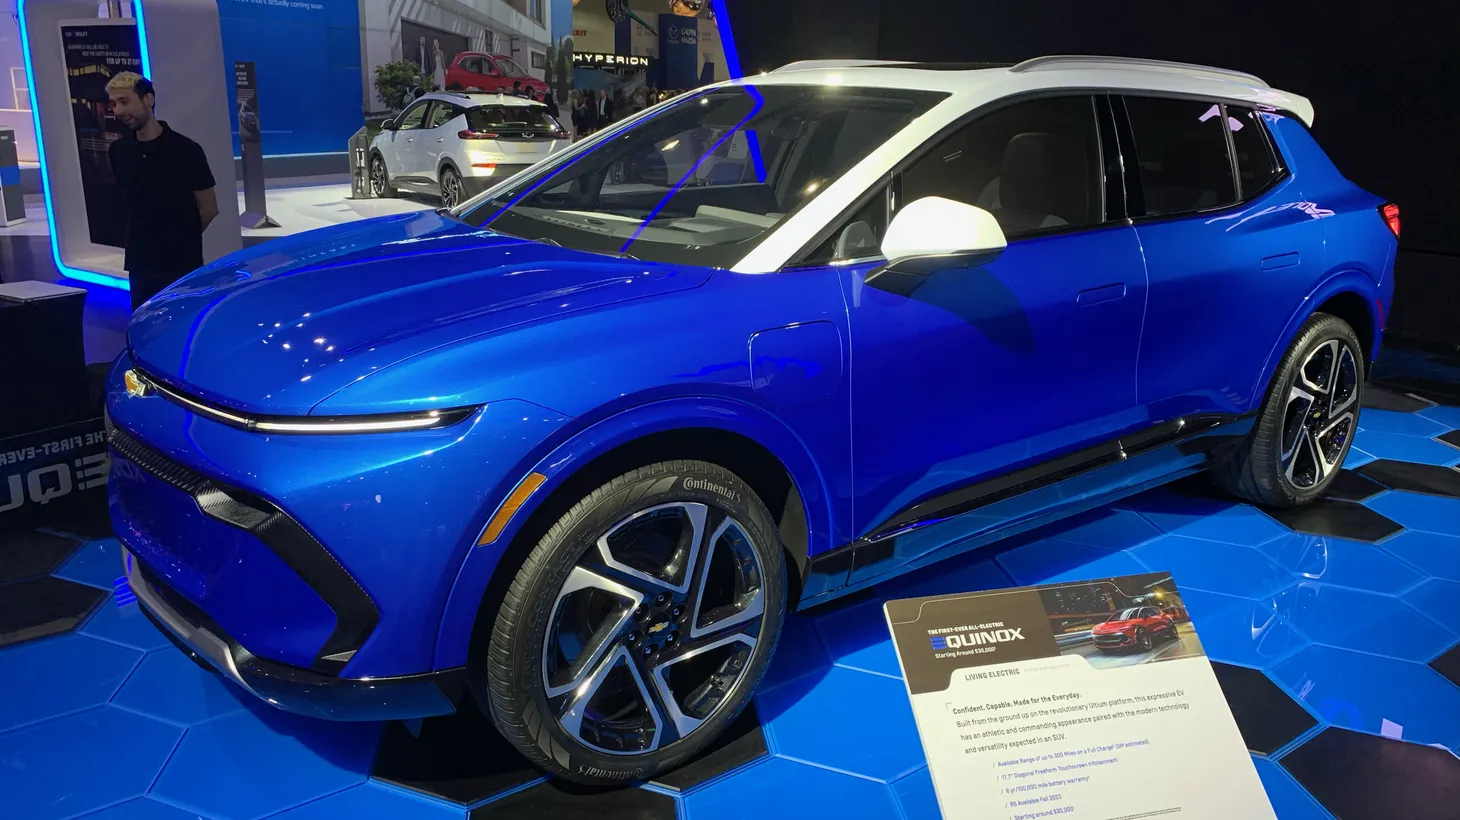 Ready for their close-up? EVs take center stage at LA Auto Show